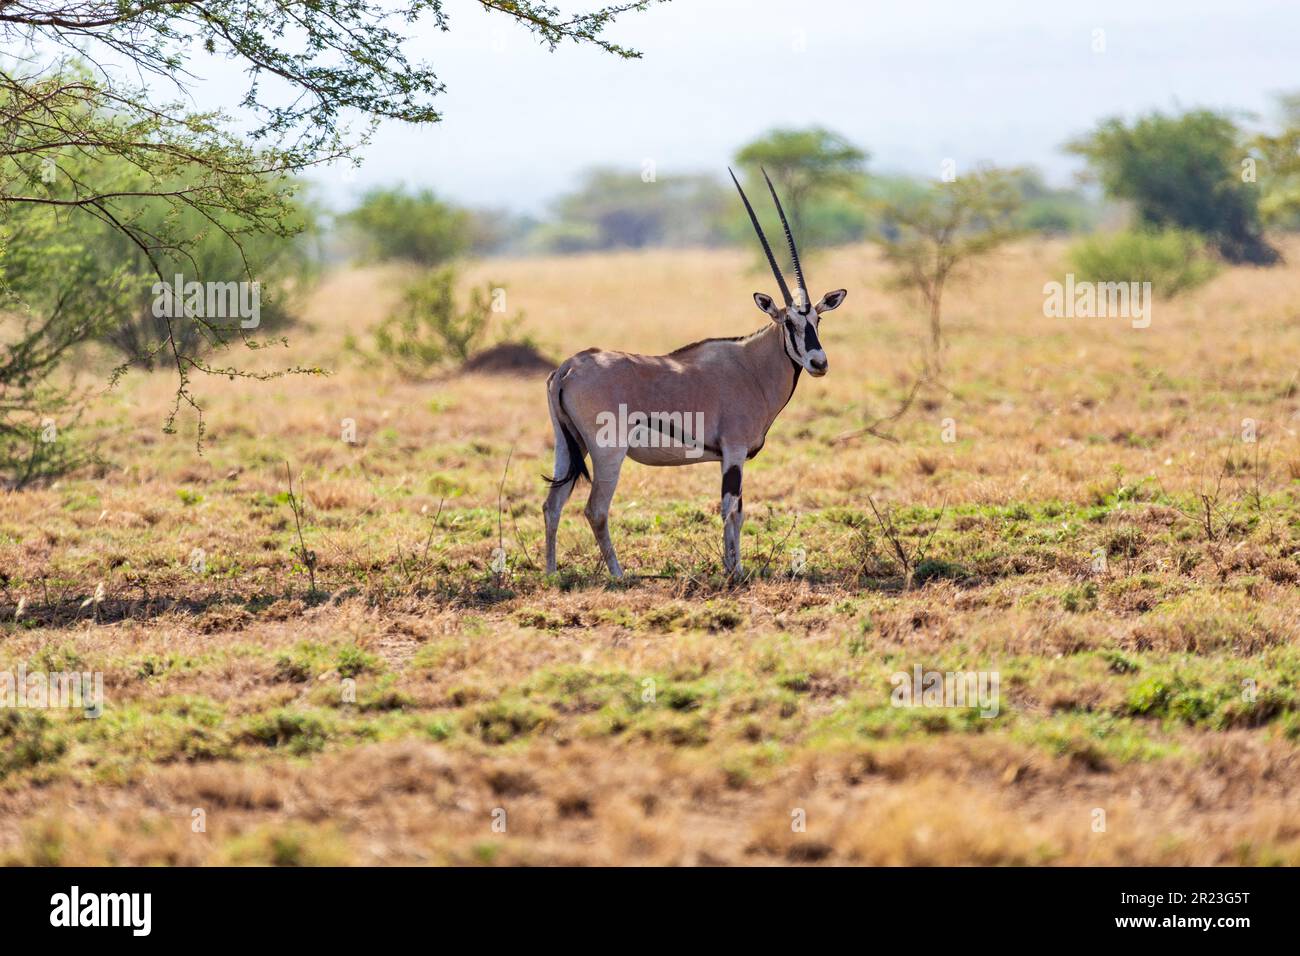 East African oryx (Oryx beisa), also known as the beisa, endemic species of medium-sized antelope from East Africa. Awash National Park. Ethiopia wild Stock Photo